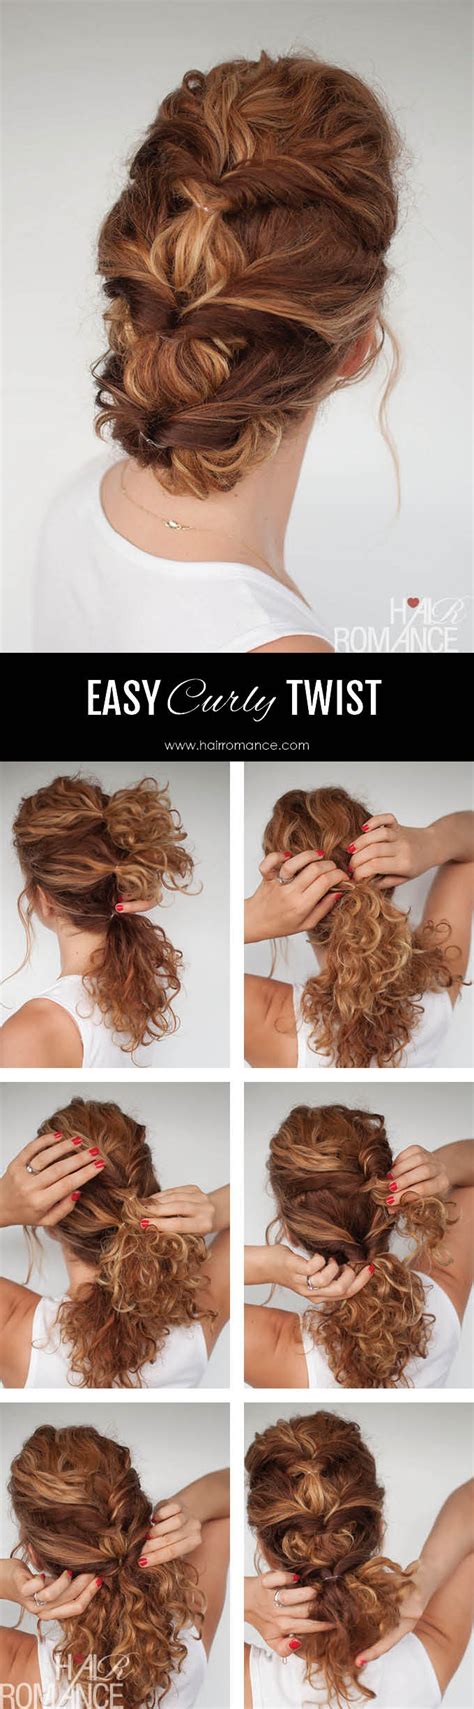 Easy Everyday Curly Hairstyle Tutorial The Curly Twist